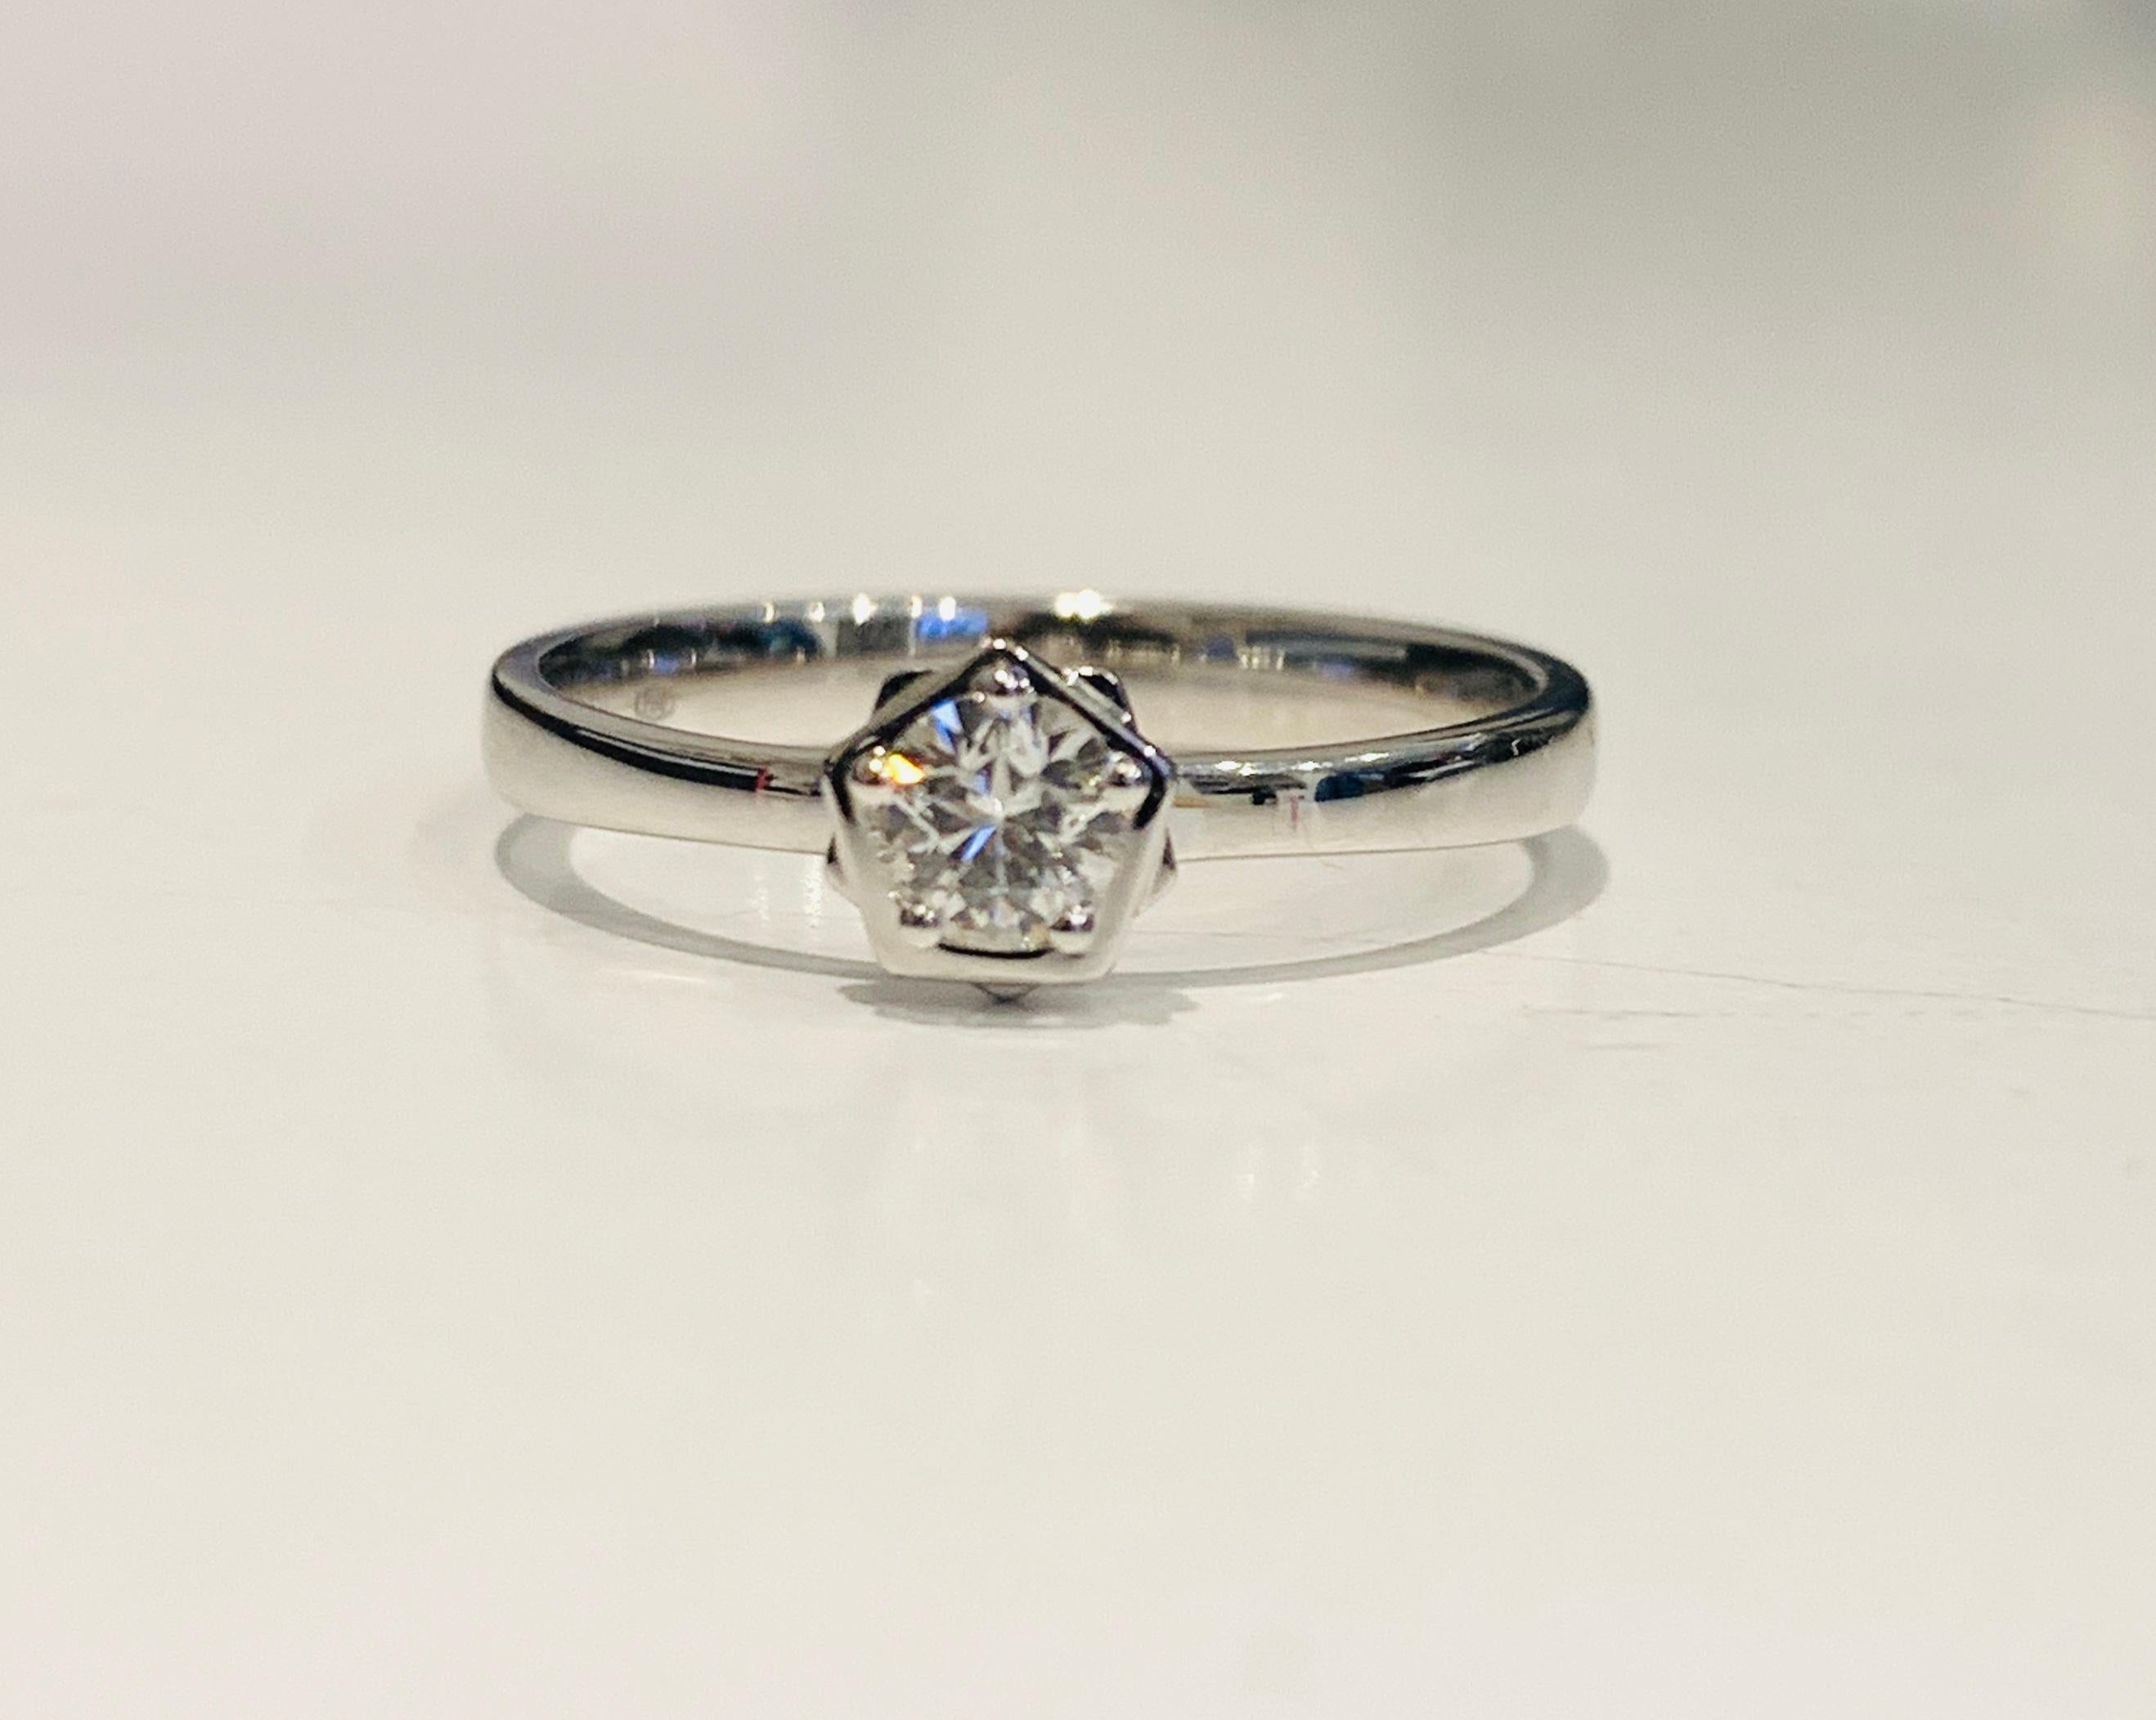 This Vitruvian Solitaire Diamond ring is part of the Vitruvian Leonardo da Vinci Cut collection. Set in 18Kt white Gold it graces the finger with Leonardo Da Vinci's Diamond Cut and architectural designs.

The Leonardo Da Vinci Cut Diamond boasts a